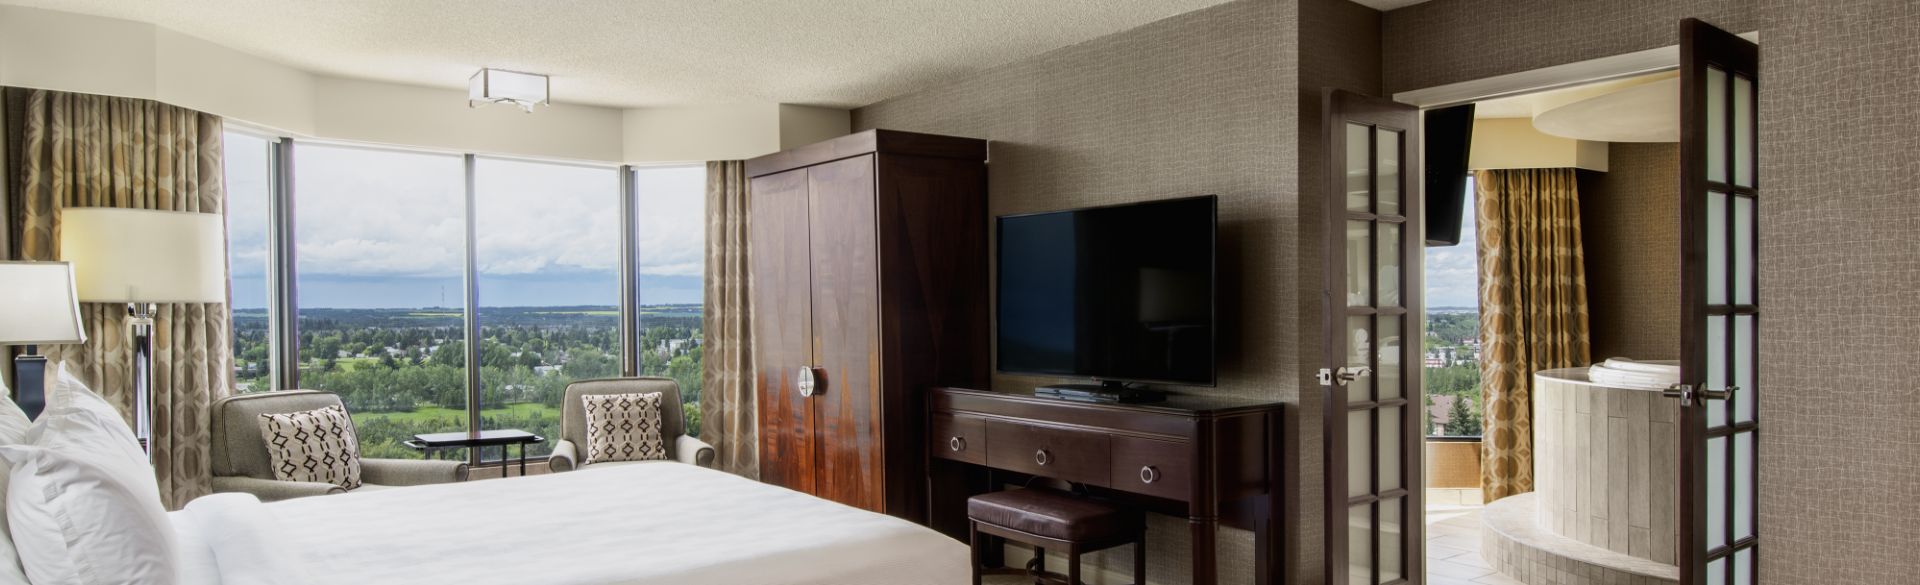 This inviting and expansive suite offers a picturesque natural view through its generous windows, adorned with exquisite wooden furniture. The adjoining bathroom features a luxurious jacuzzi bathtub, conveniently located near the bedroom.